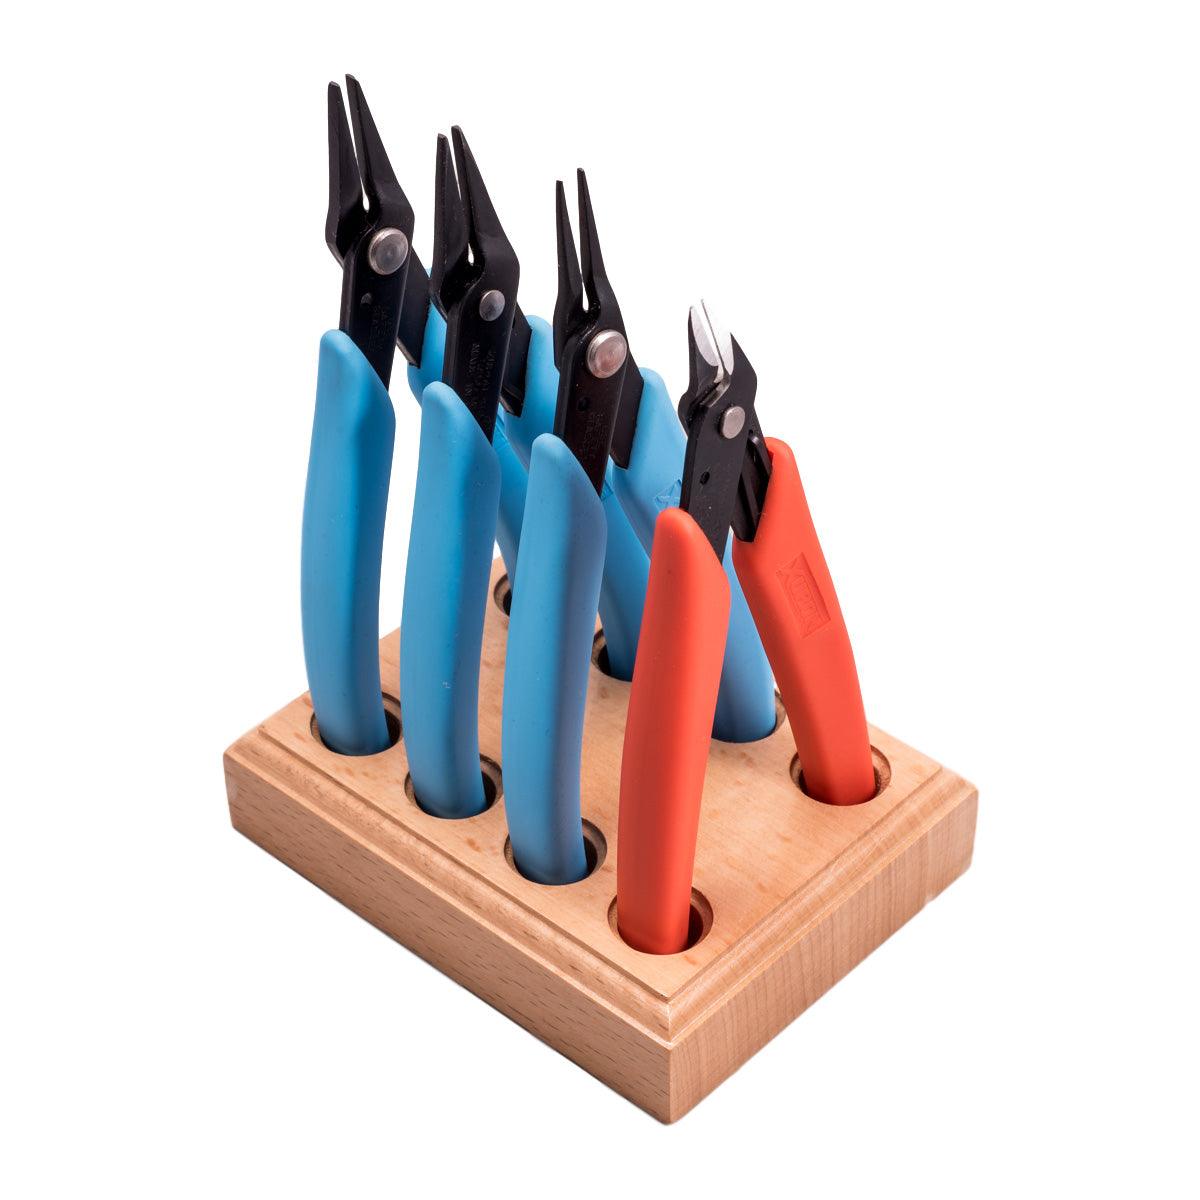 Xuron Pliers & Cutter Kit of 4 on Wood Stand